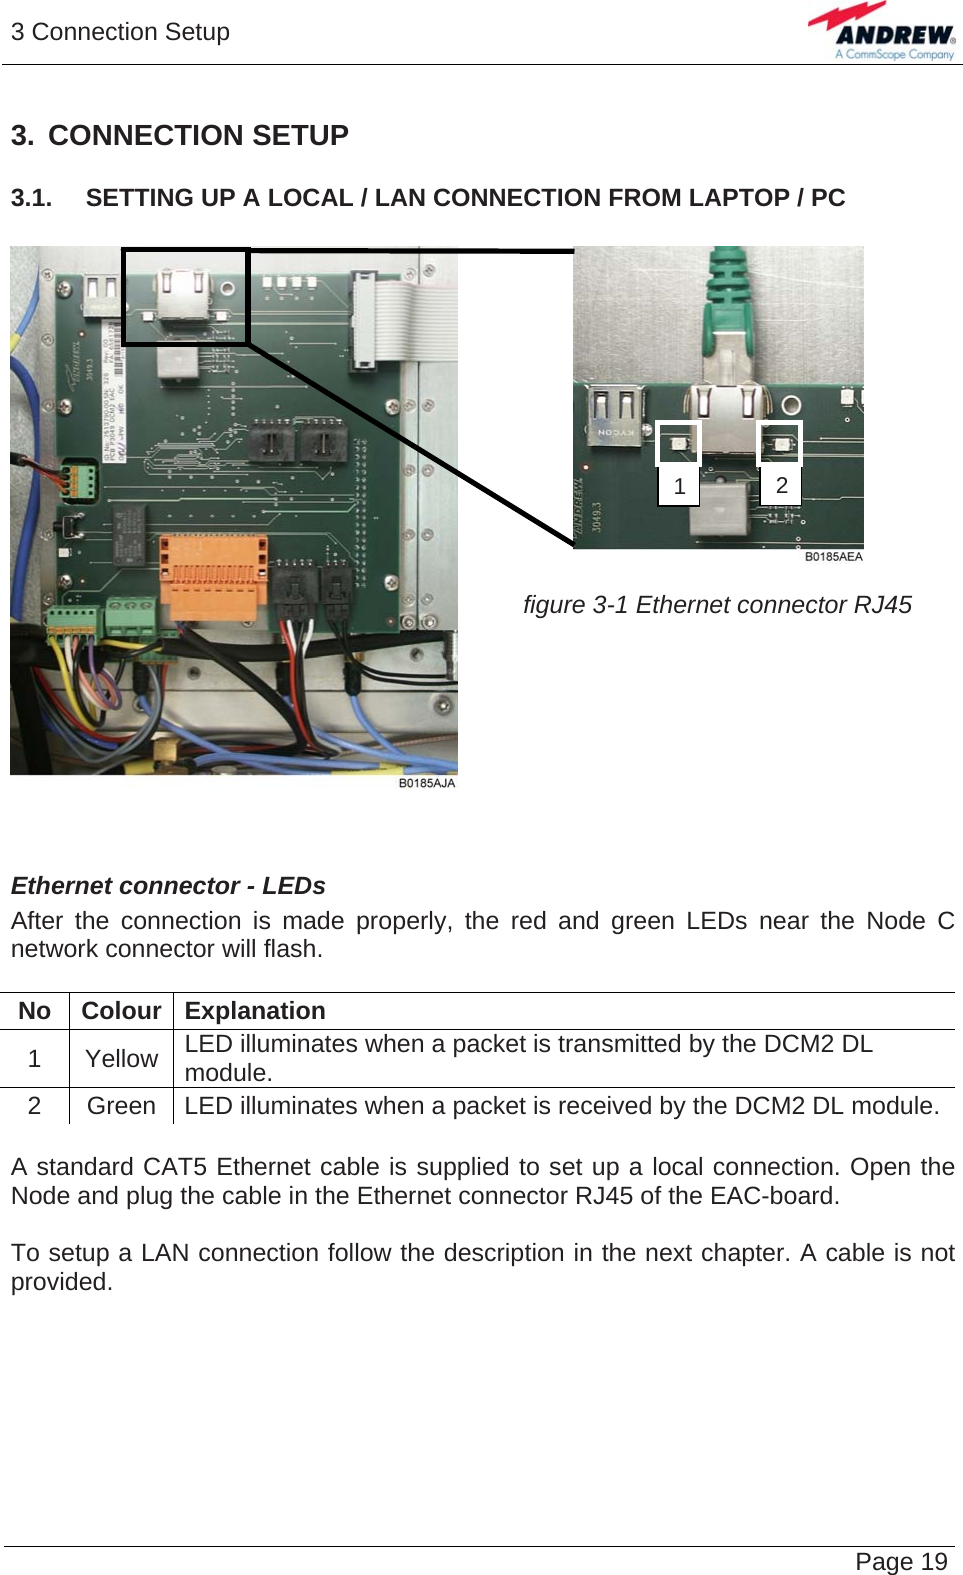 3 Connection Setup   Page 193. CONNECTION SETUP 3.1.  SETTING UP A LOCAL / LAN CONNECTION FROM LAPTOP / PC    figure 3-1 Ethernet connector RJ45 2 1  Ethernet connector - LEDs After the connection is made properly, the red and green LEDs near the Node C network connector will flash.  No Colour Explanation 1 Yellow LED illuminates when a packet is transmitted by the DCM2 DL module. 2  Green  LED illuminates when a packet is received by the DCM2 DL module.  A standard CAT5 Ethernet cable is supplied to set up a local connection. Open the Node and plug the cable in the Ethernet connector RJ45 of the EAC-board.  To setup a LAN connection follow the description in the next chapter. A cable is not provided.   